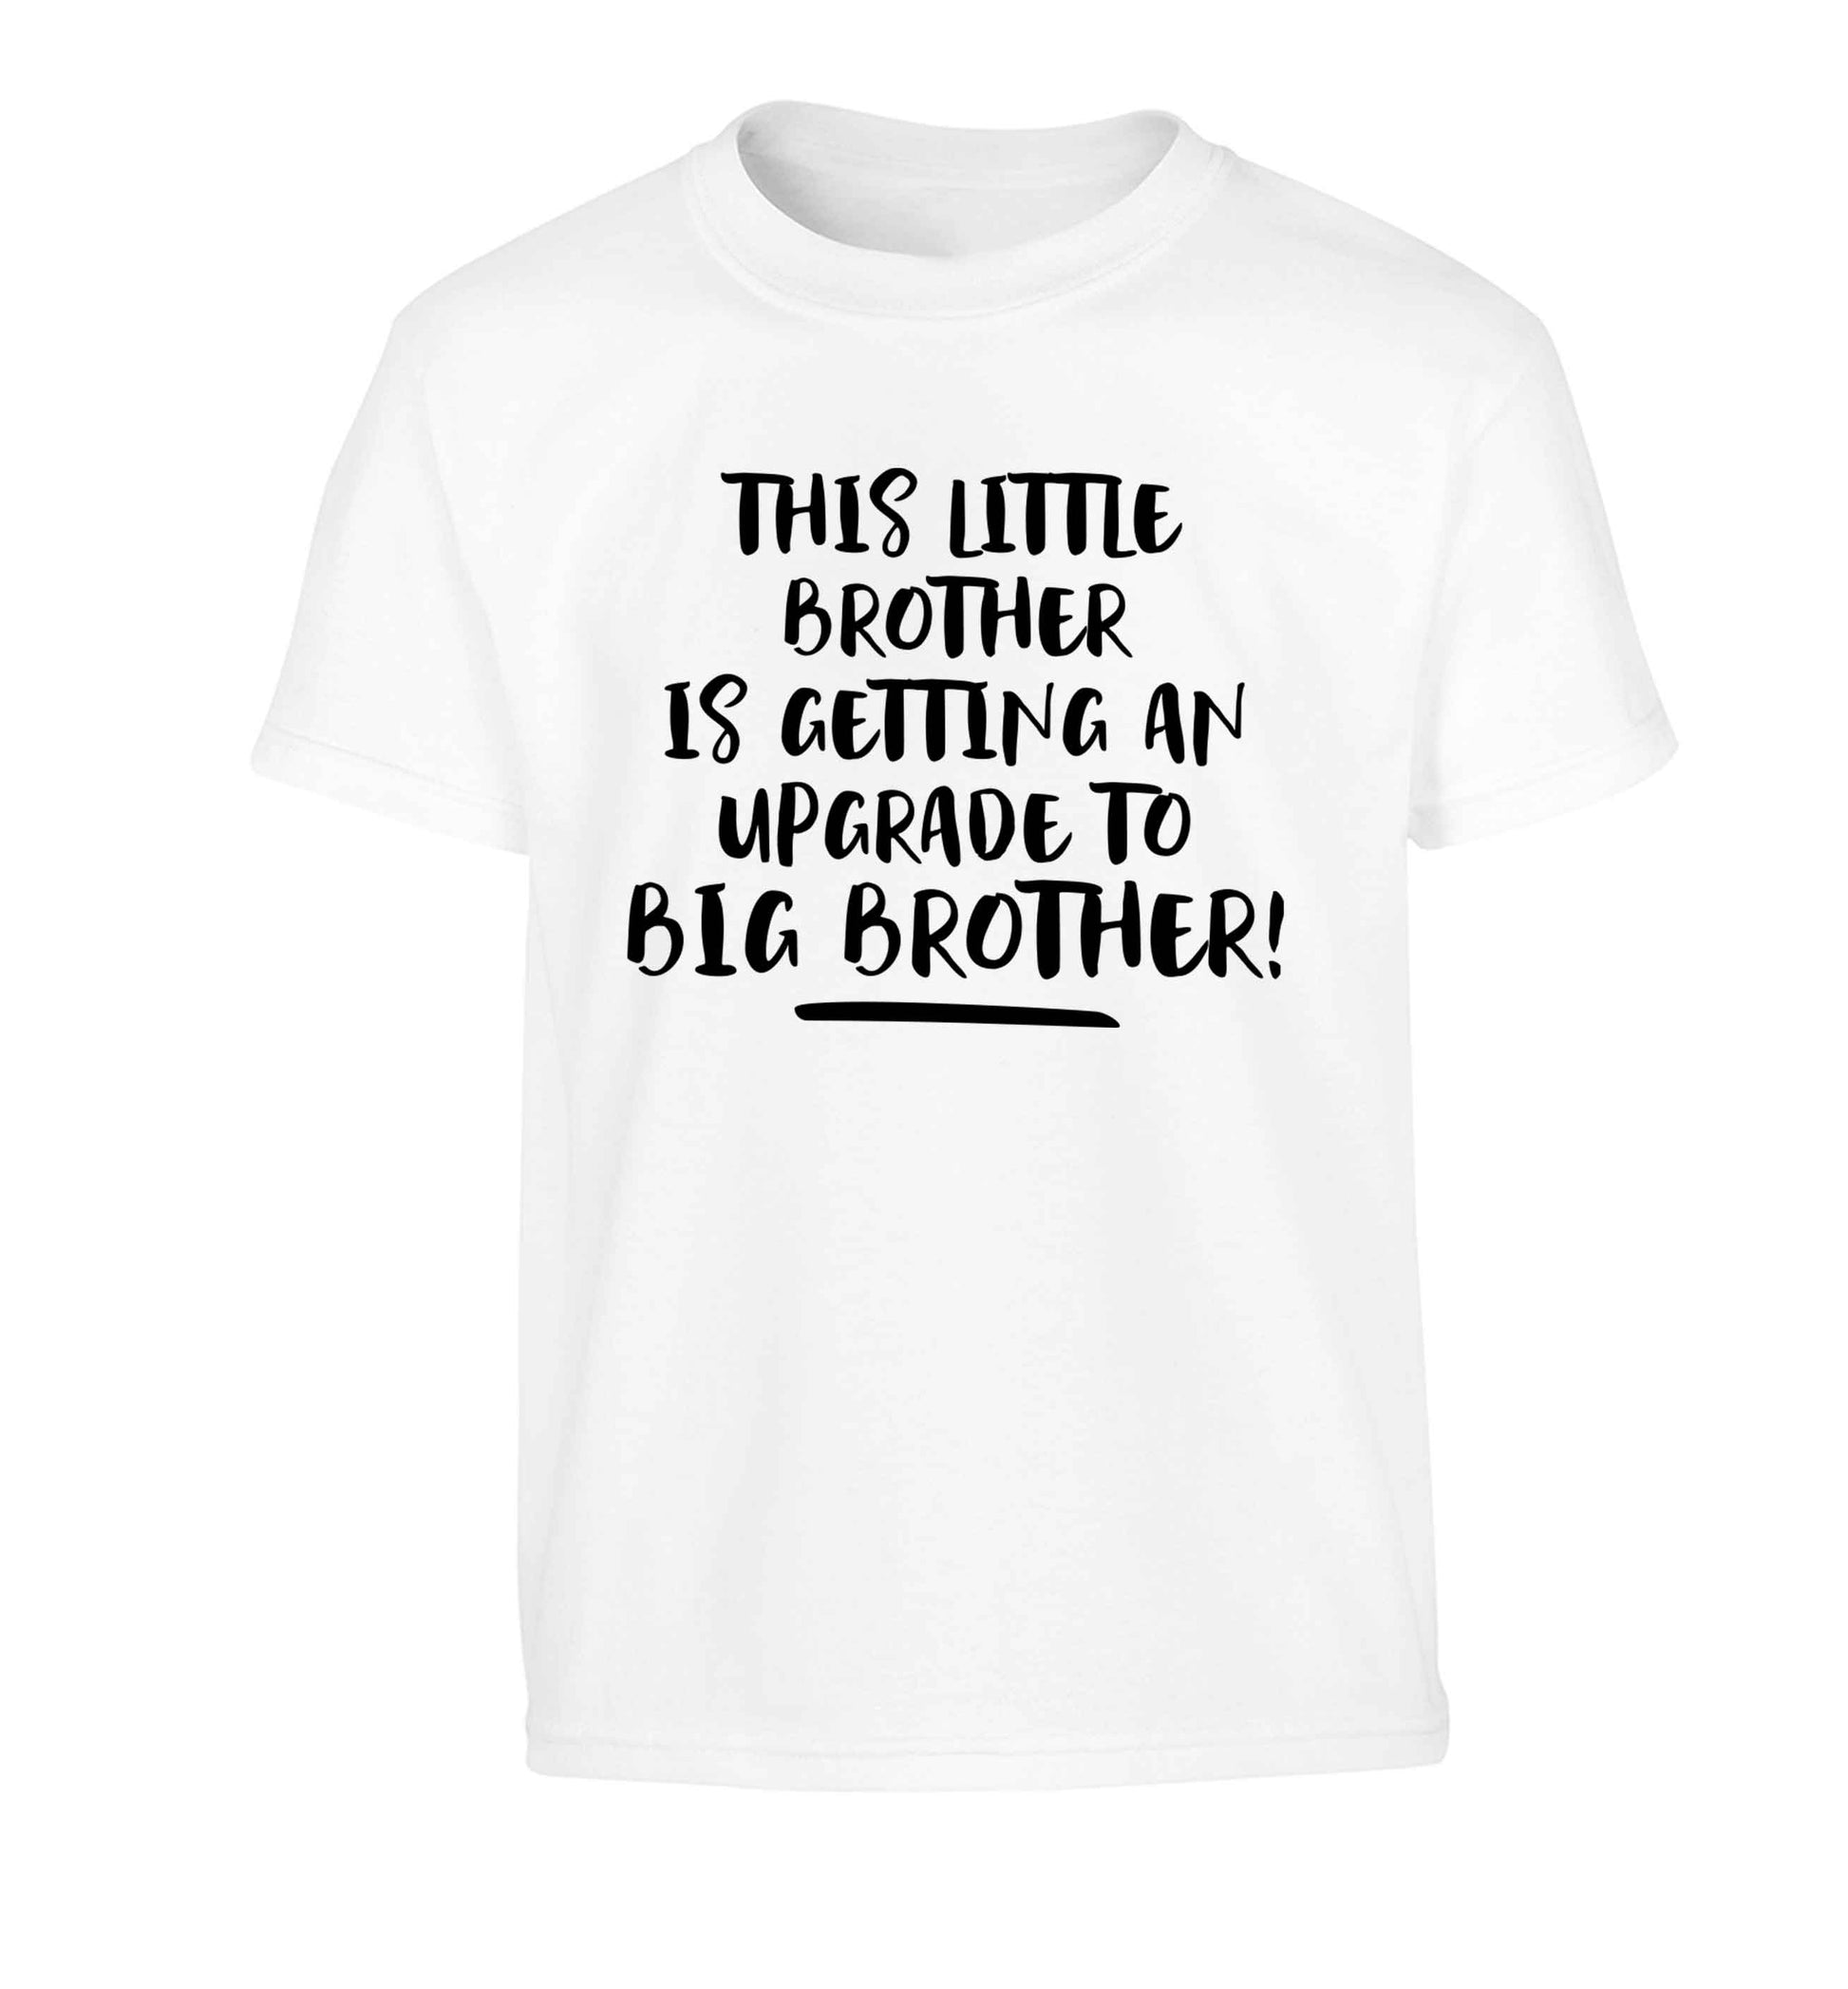 This little brother is getting an upgrade to big brother! Children's white Tshirt 12-13 Years